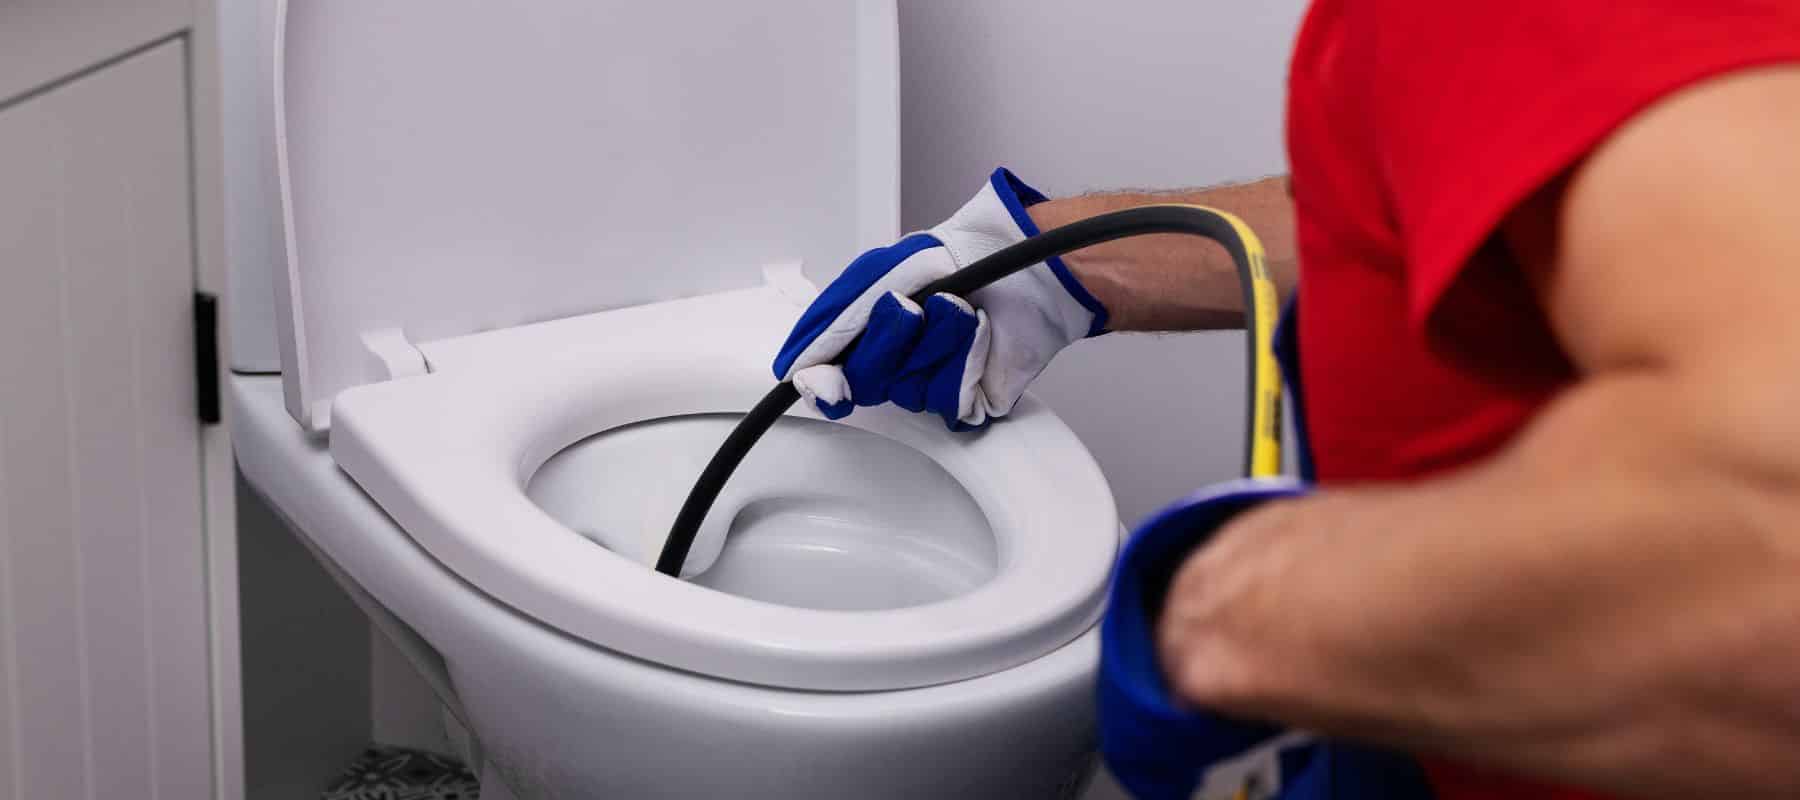 plumber wearing blue and white gloves using a hydrojetting tool to clear a toilet drain